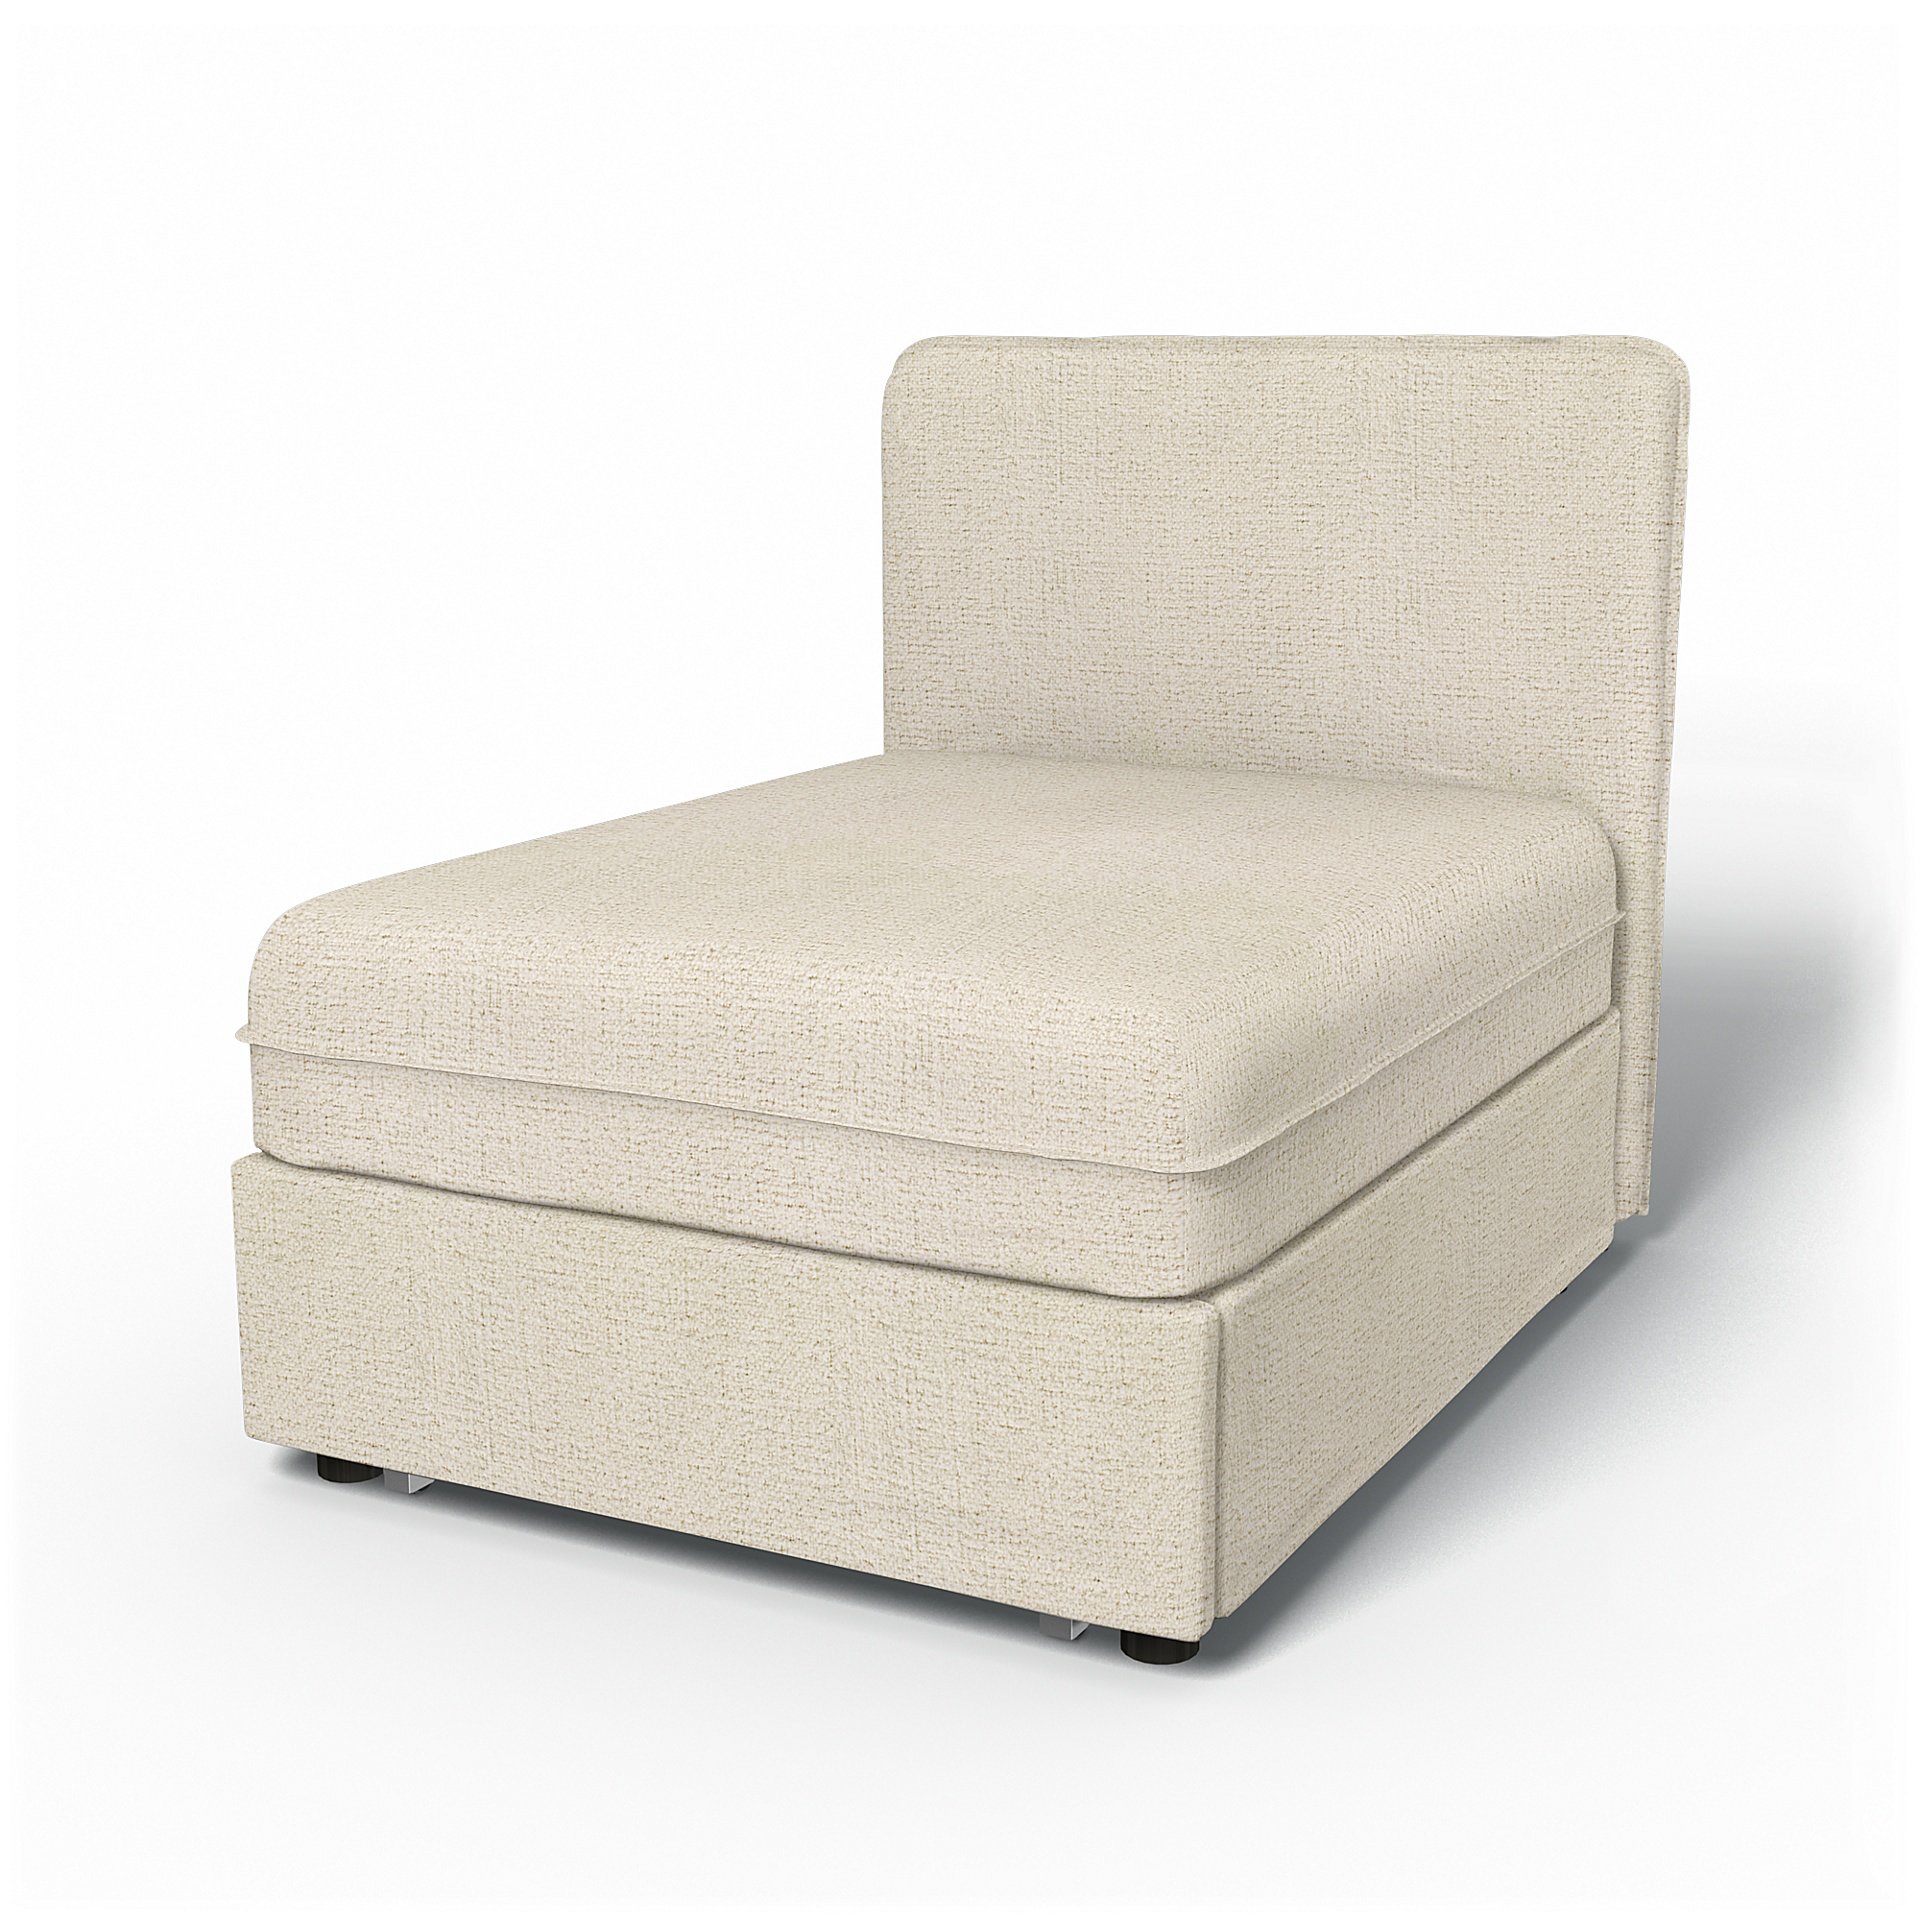 IKEA - Vallentuna Seat Module with Low Back Sofa Bed Cover 80x100 cm 32x39in, Ecru, Boucle & Texture